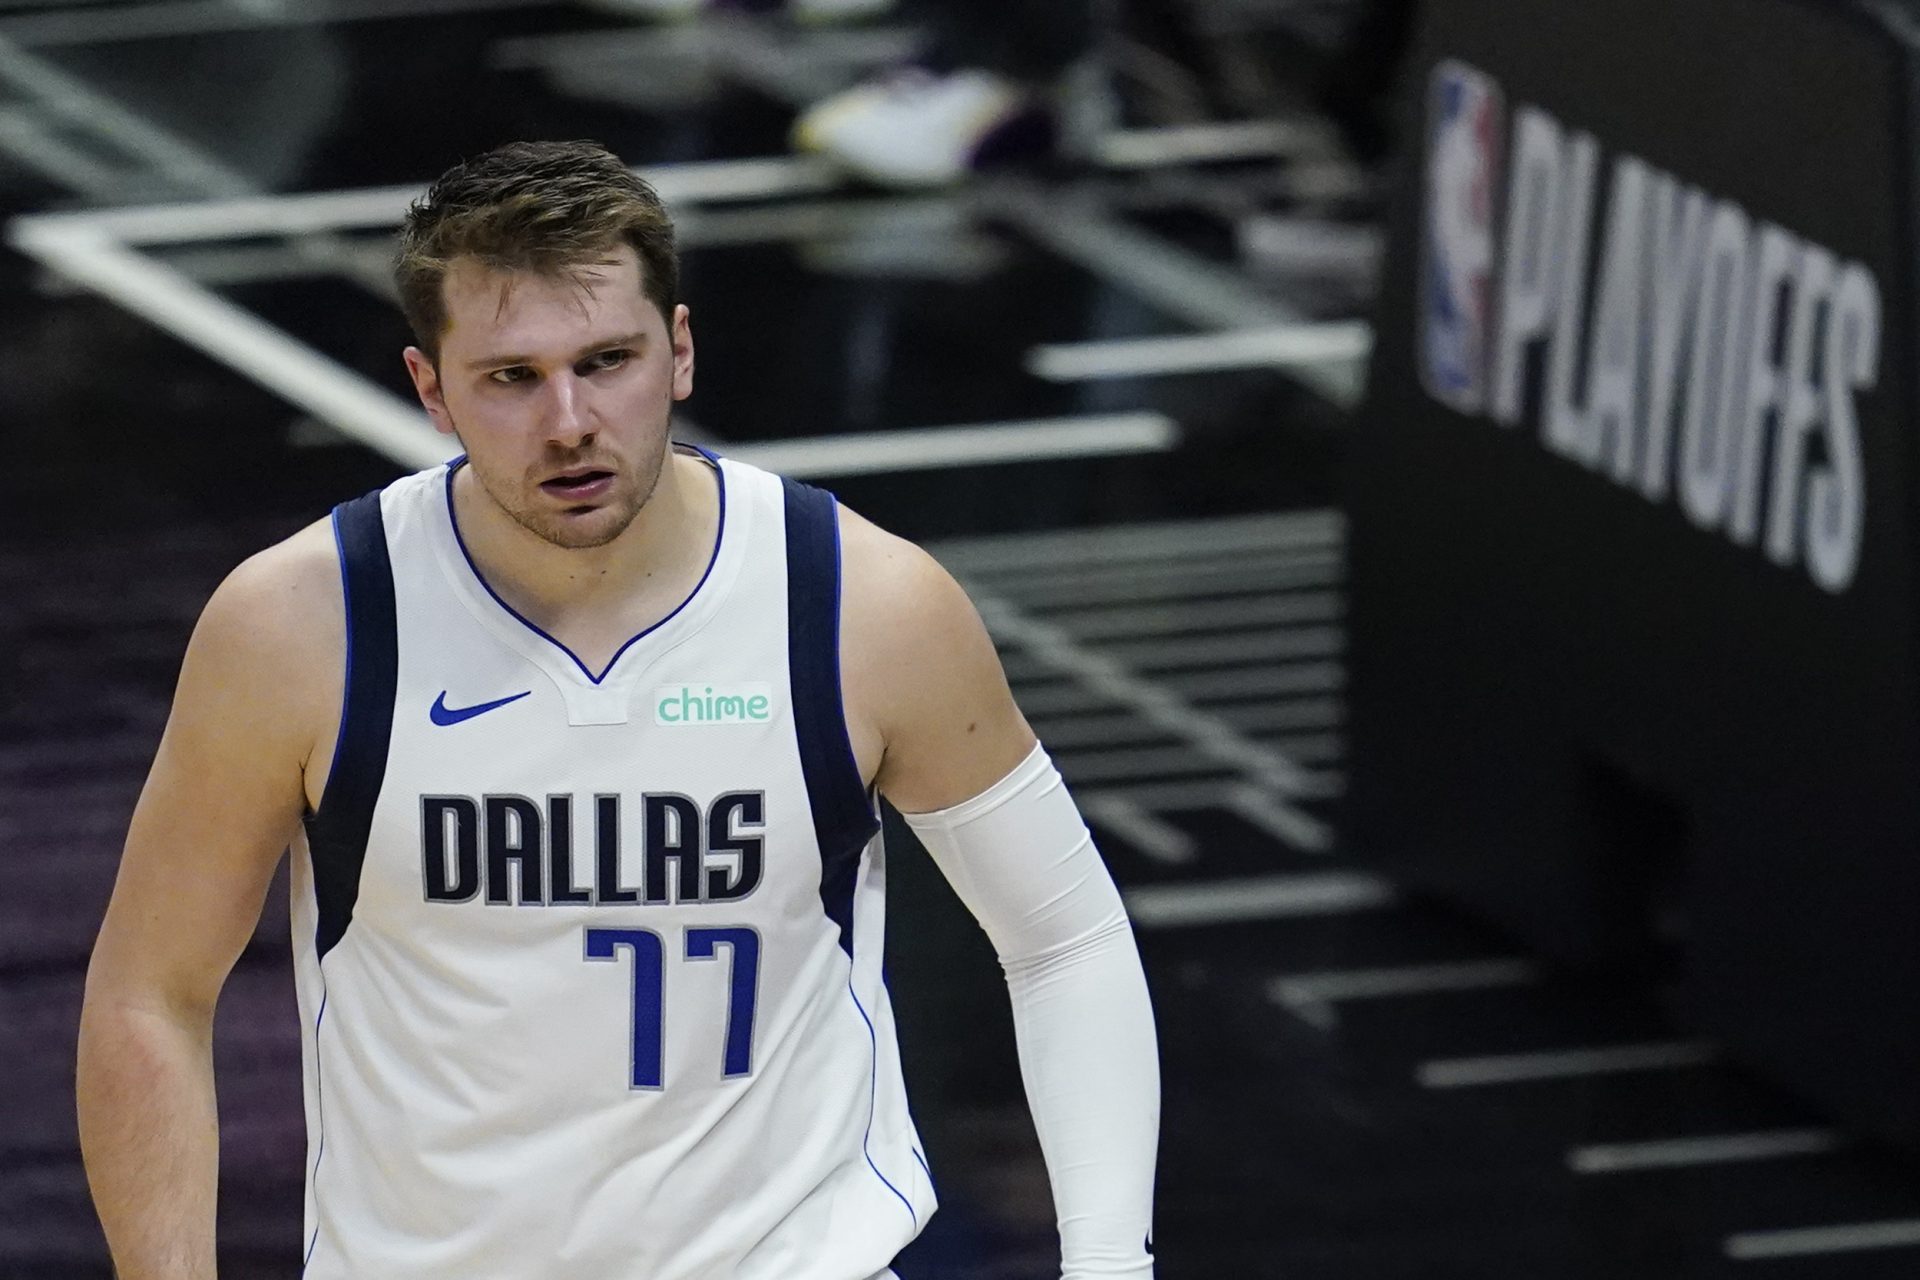 Legend: Luka Doncic Snapped at Mavs Exec, Team Fervent over Star’s Future in DAL